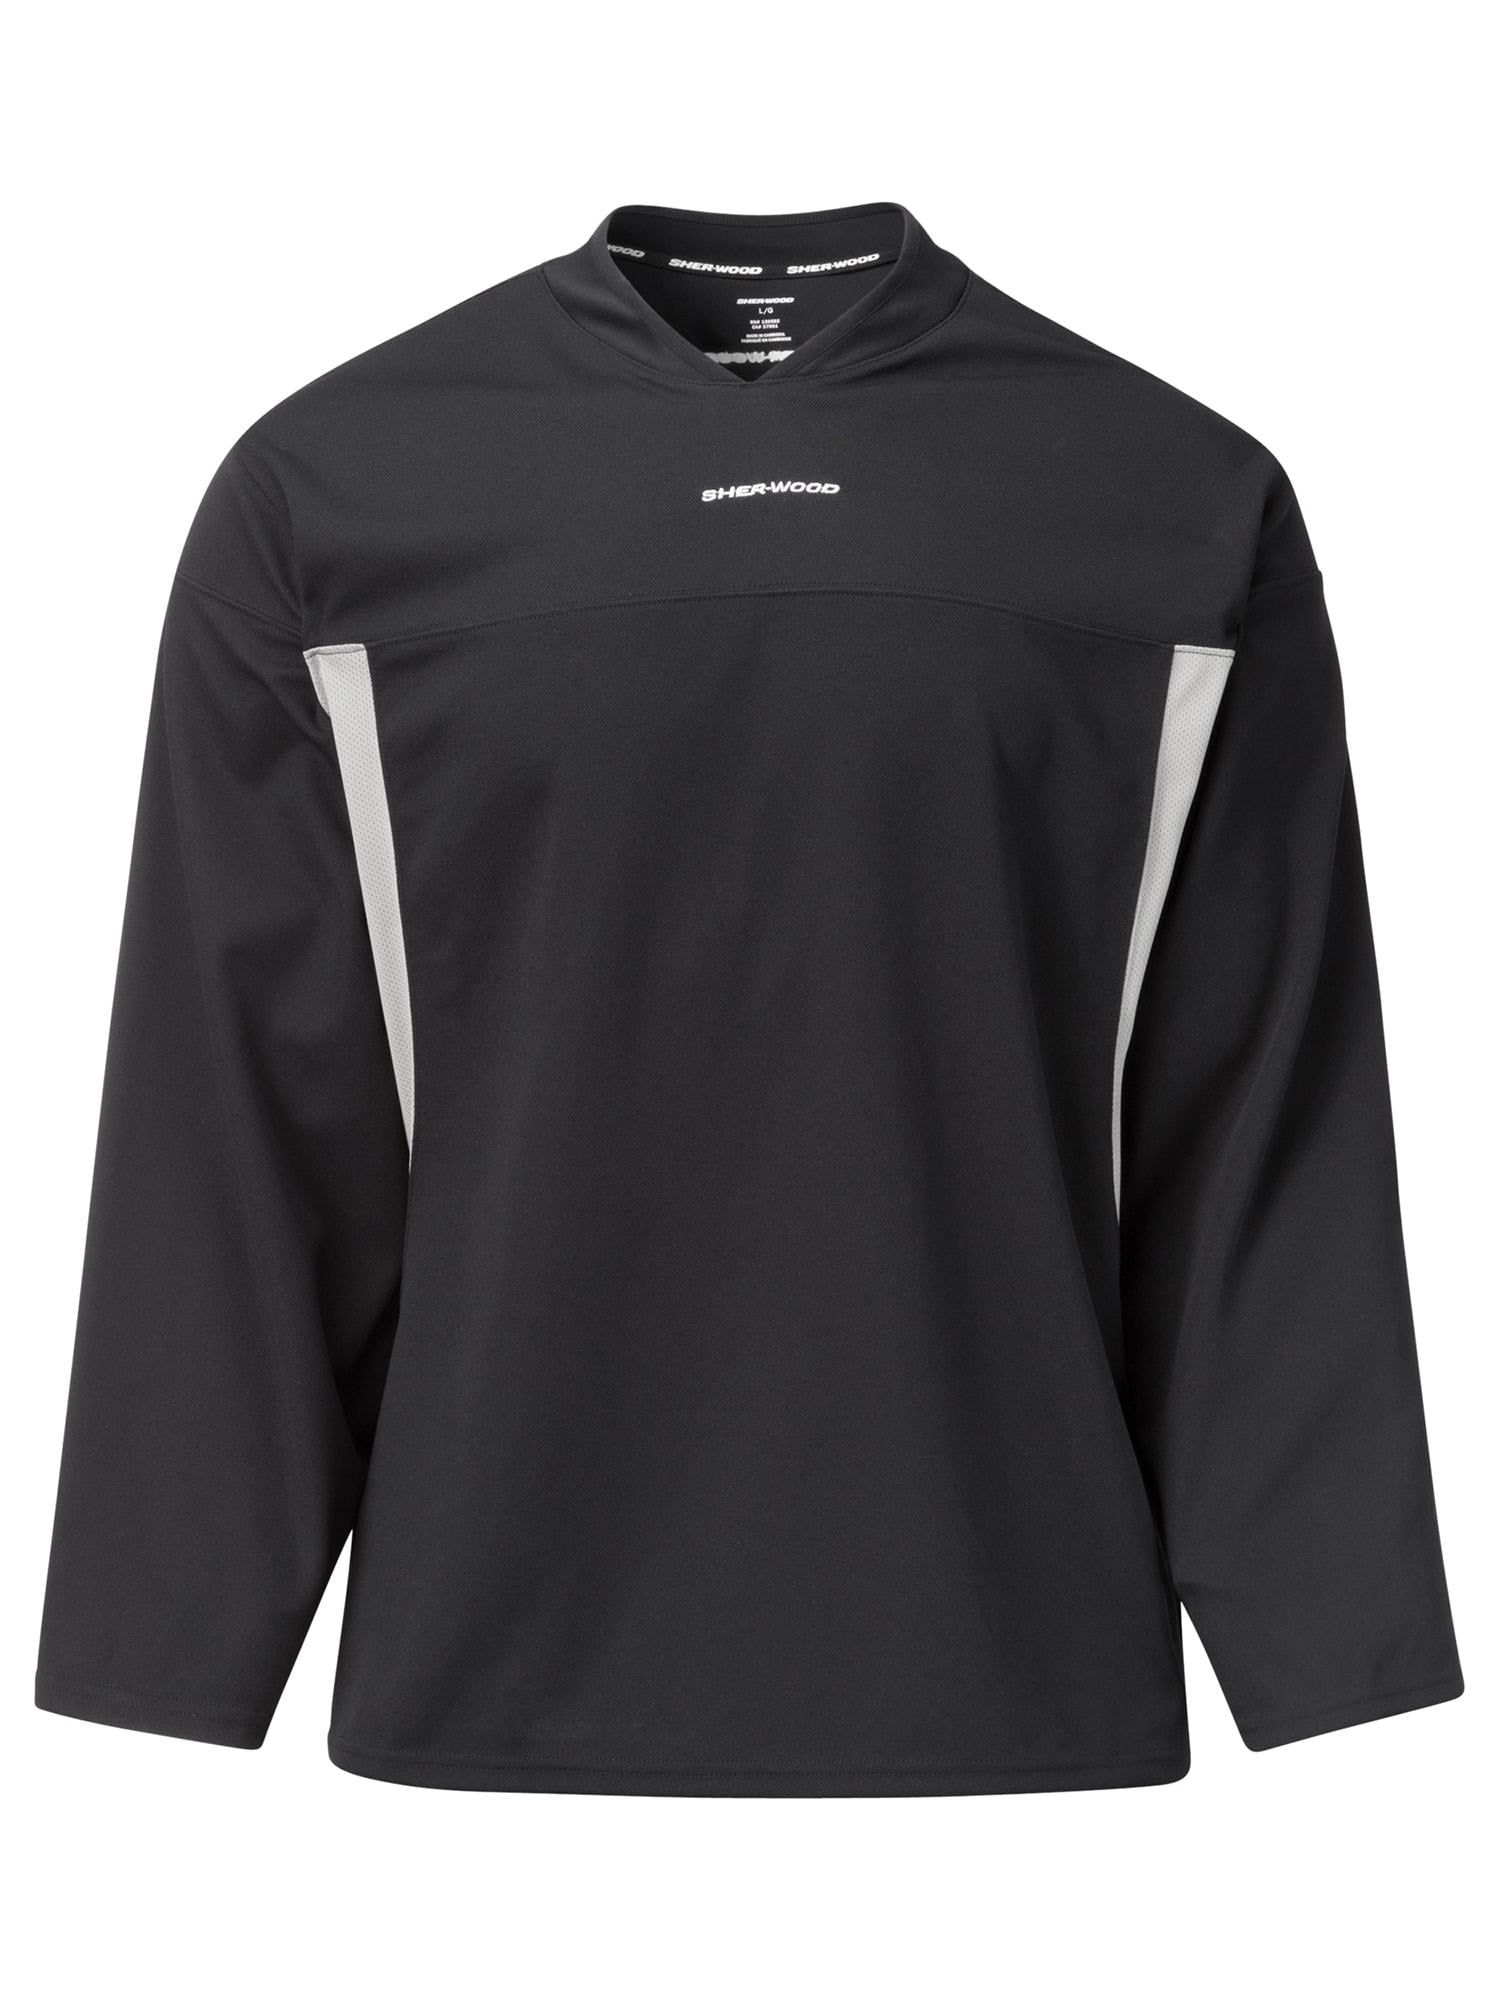 Sherwood Hockey Long Sleeve Top with Integrated Neck Guard, Youth